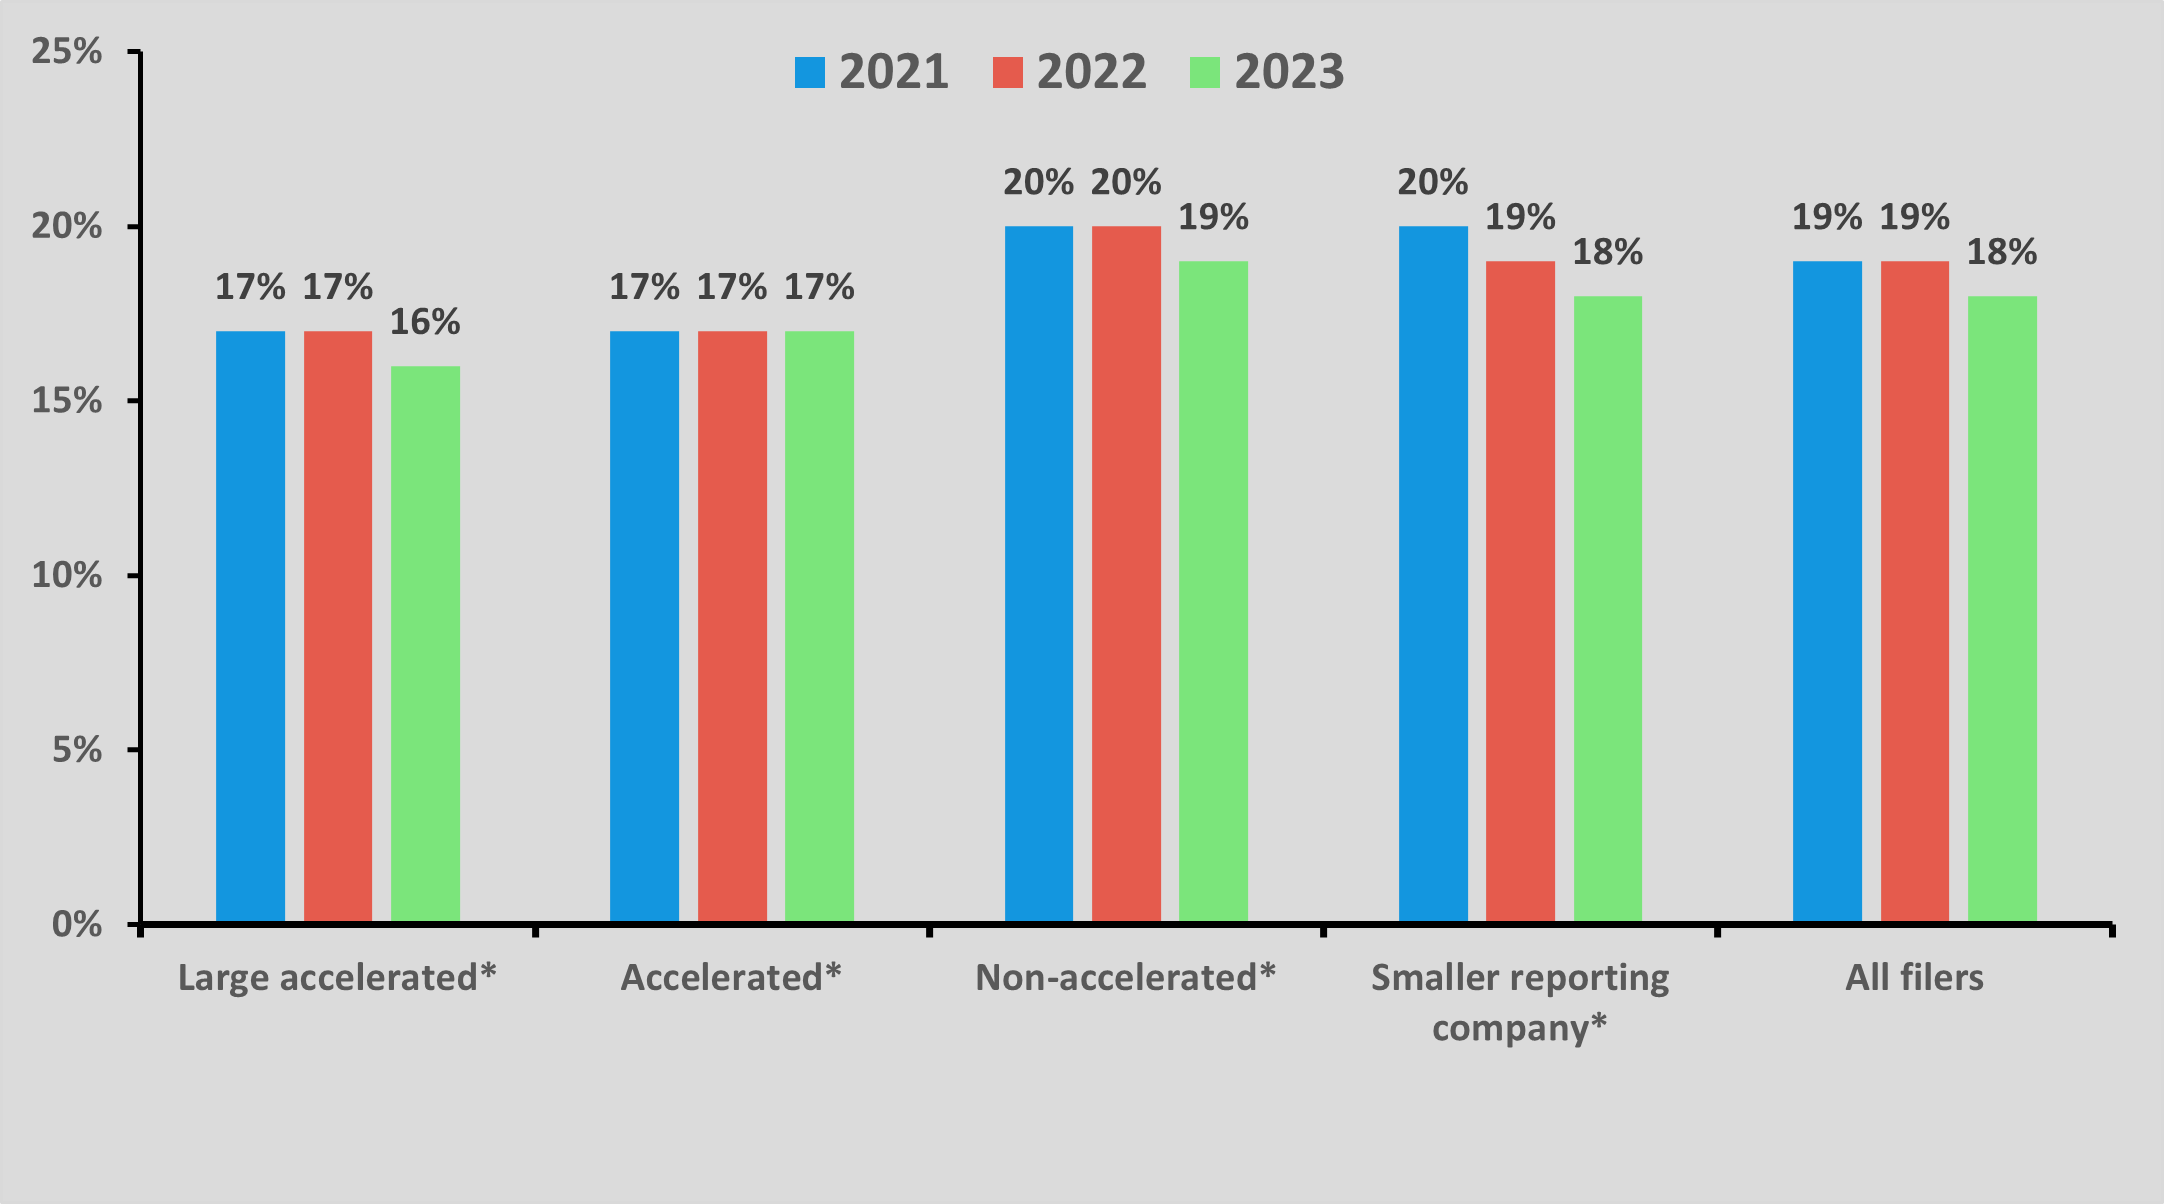 The analysis for Forms 10-K and 10-K/A shows a decrease in average custom tag rate for filings in 2023 compared to 2022 across all filer status except the accelerated filer category, for which the rate remains flat.